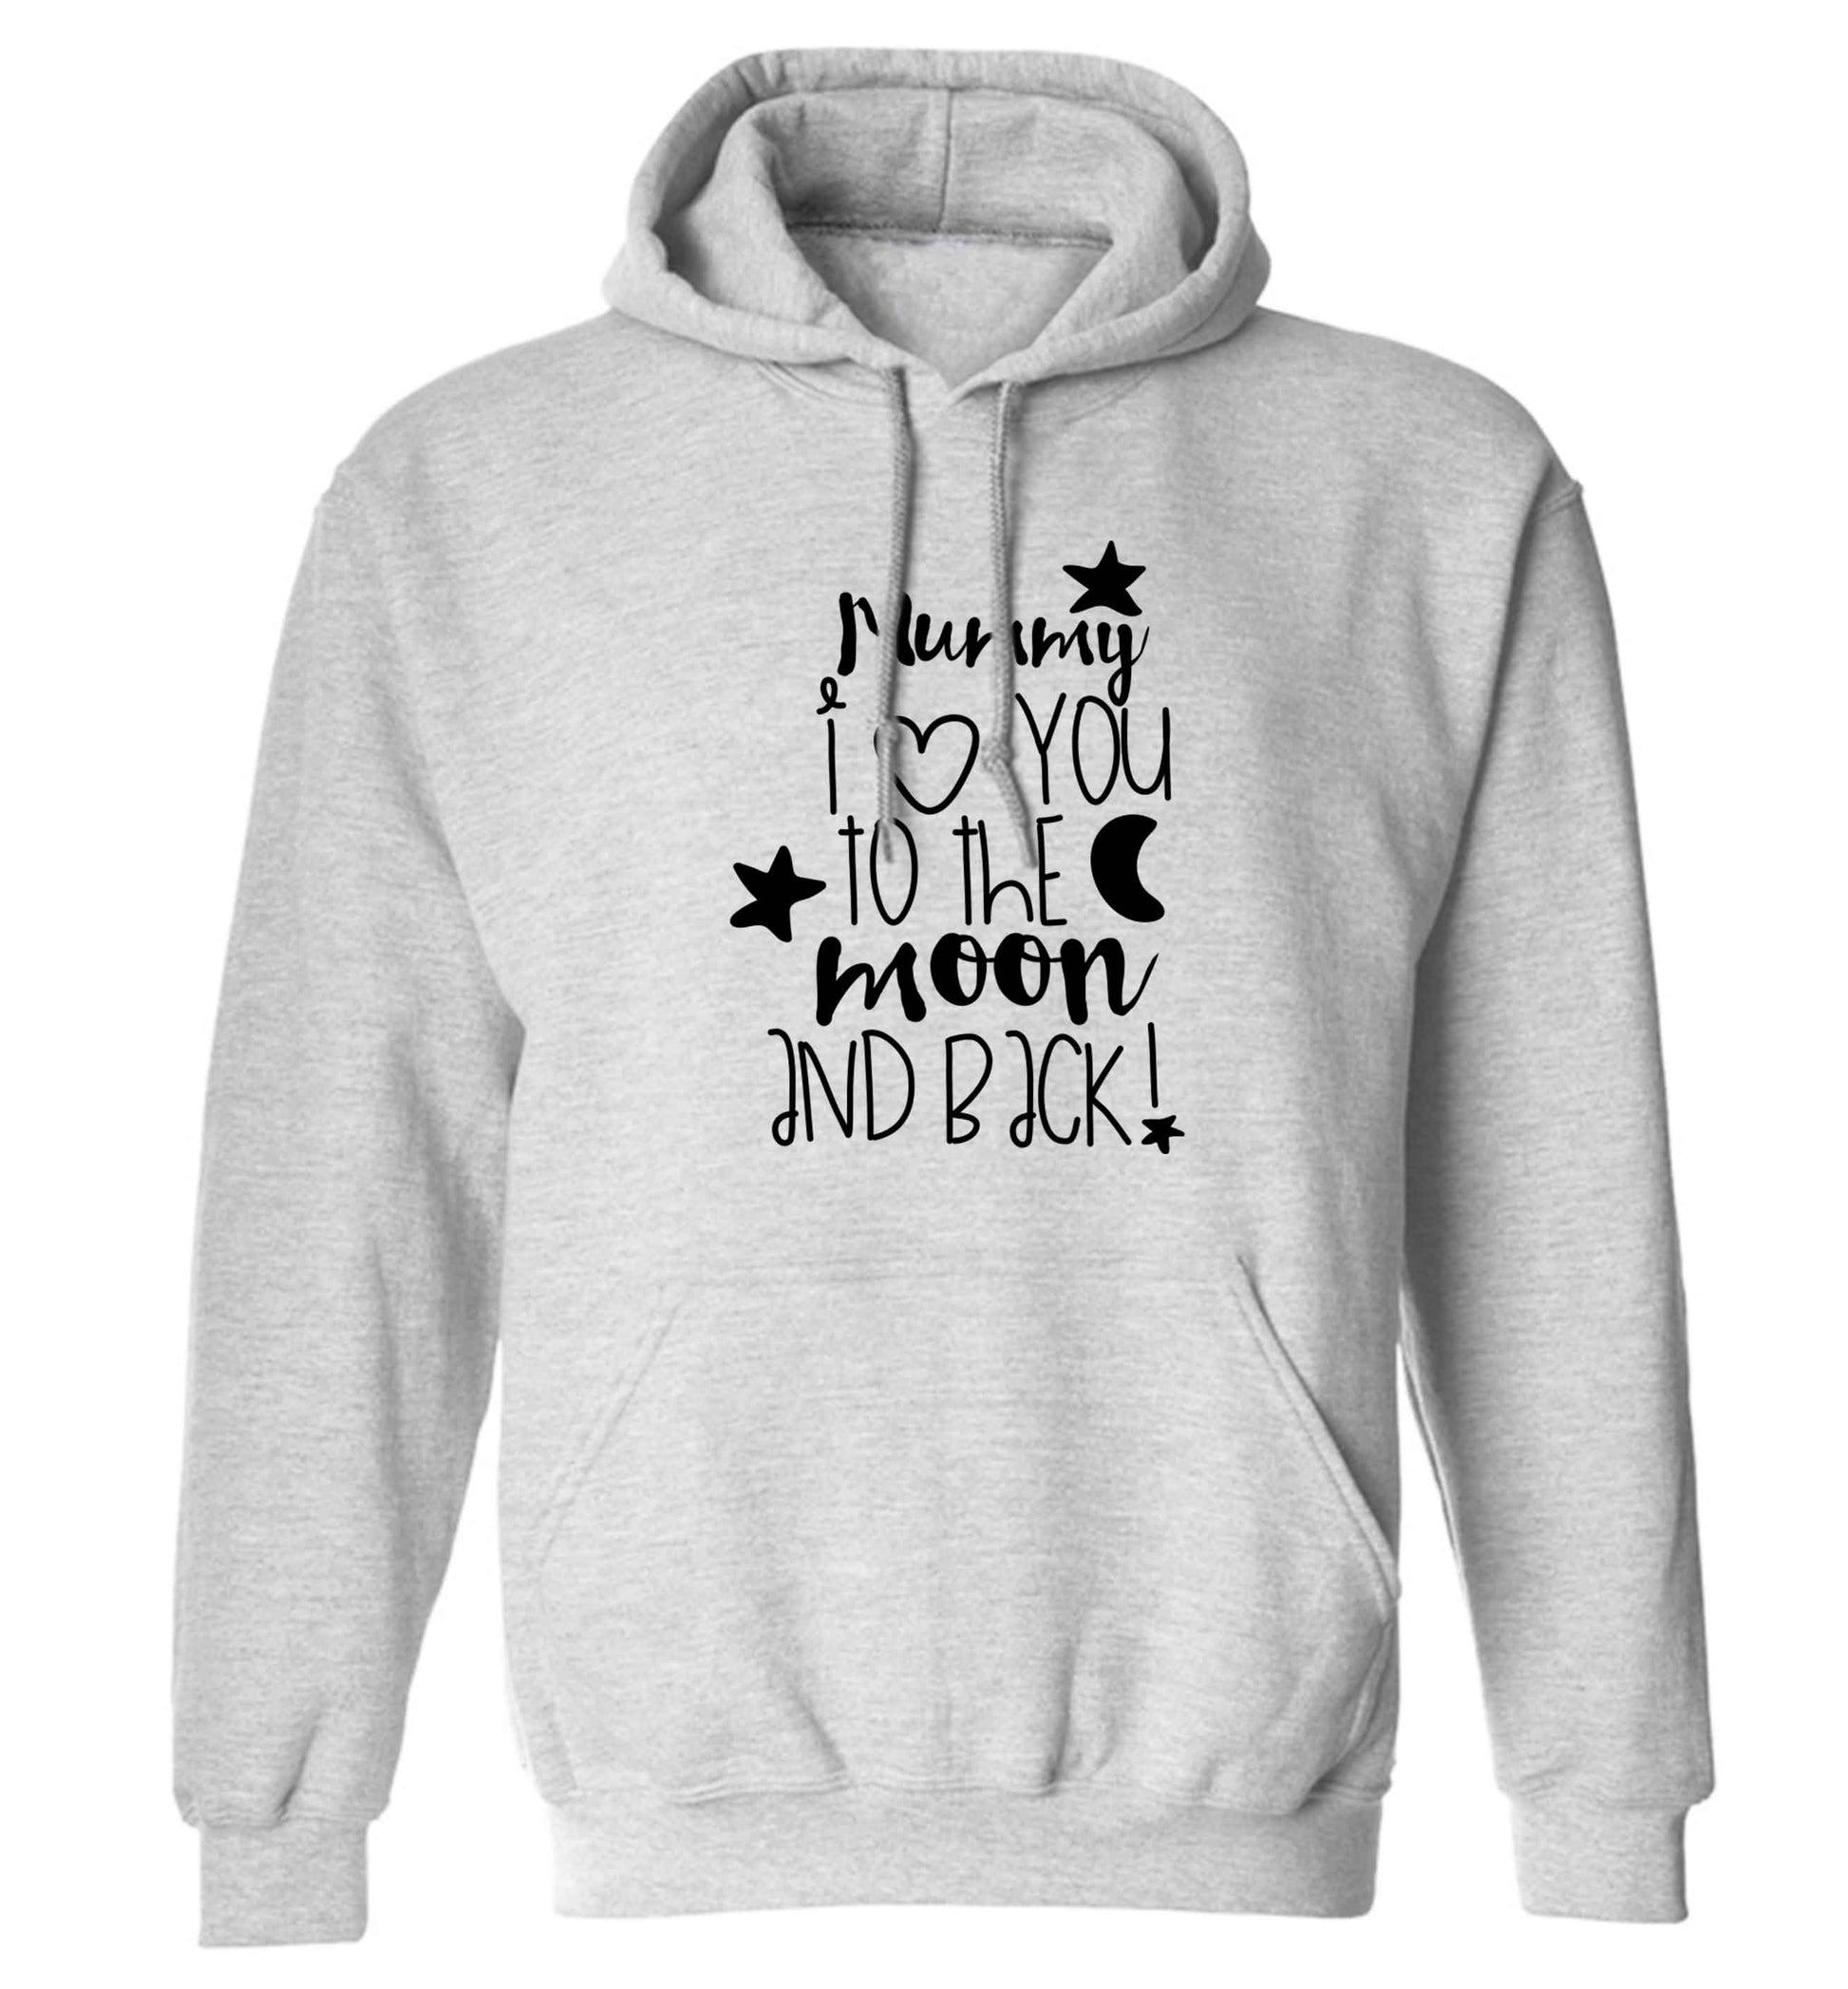 Mummy I love you to the moon and back adults unisex grey hoodie 2XL